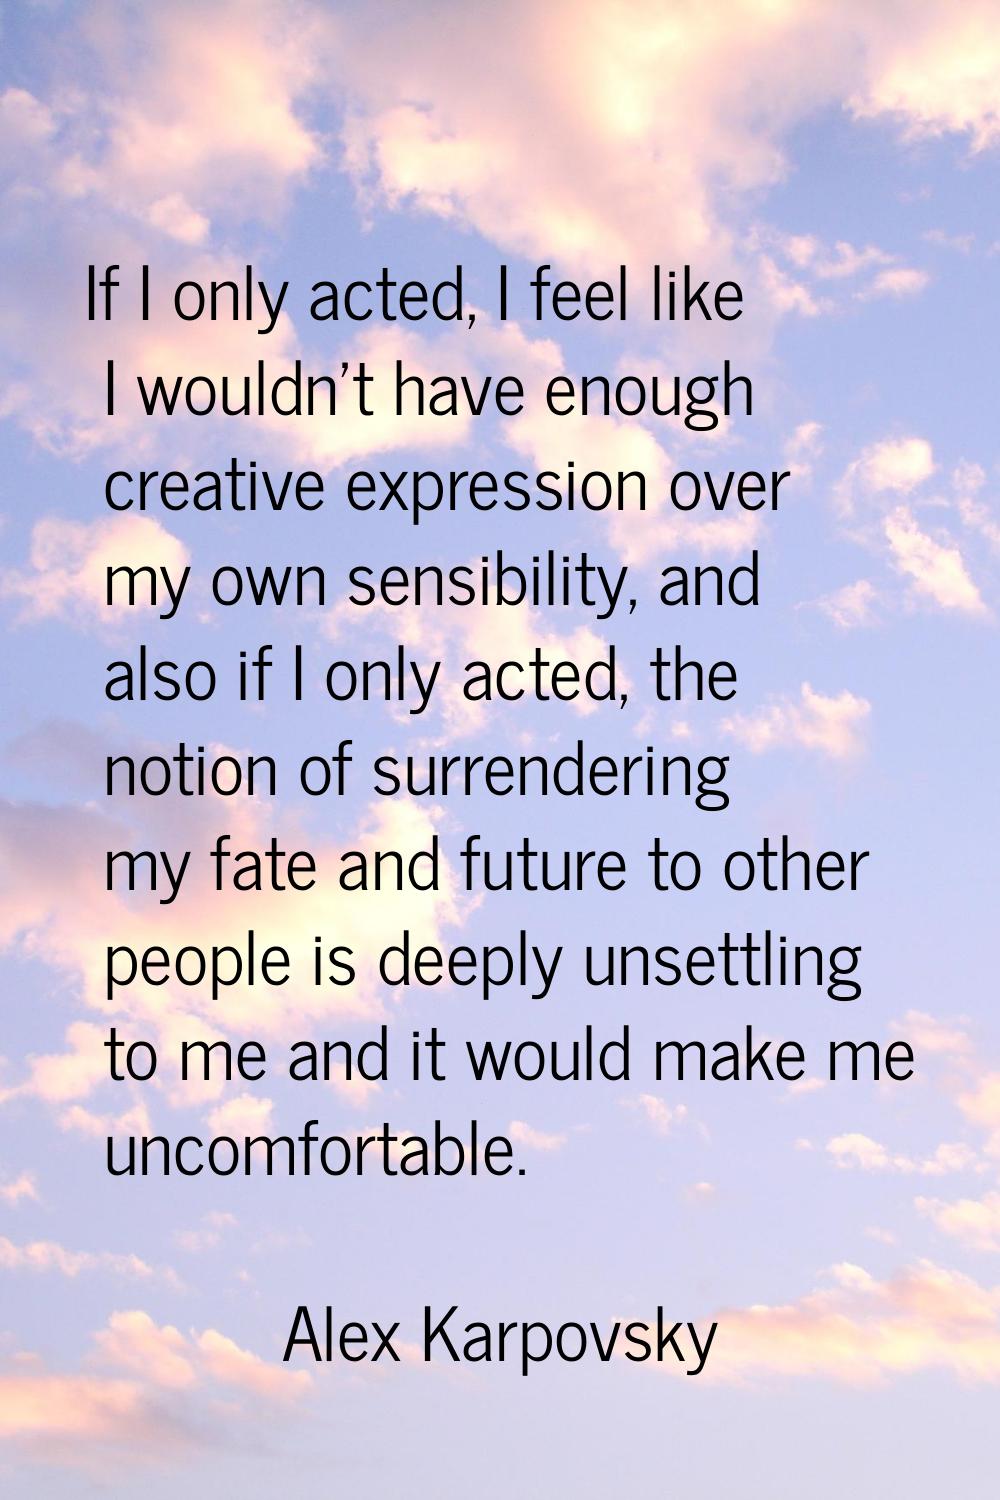 If I only acted, I feel like I wouldn't have enough creative expression over my own sensibility, an